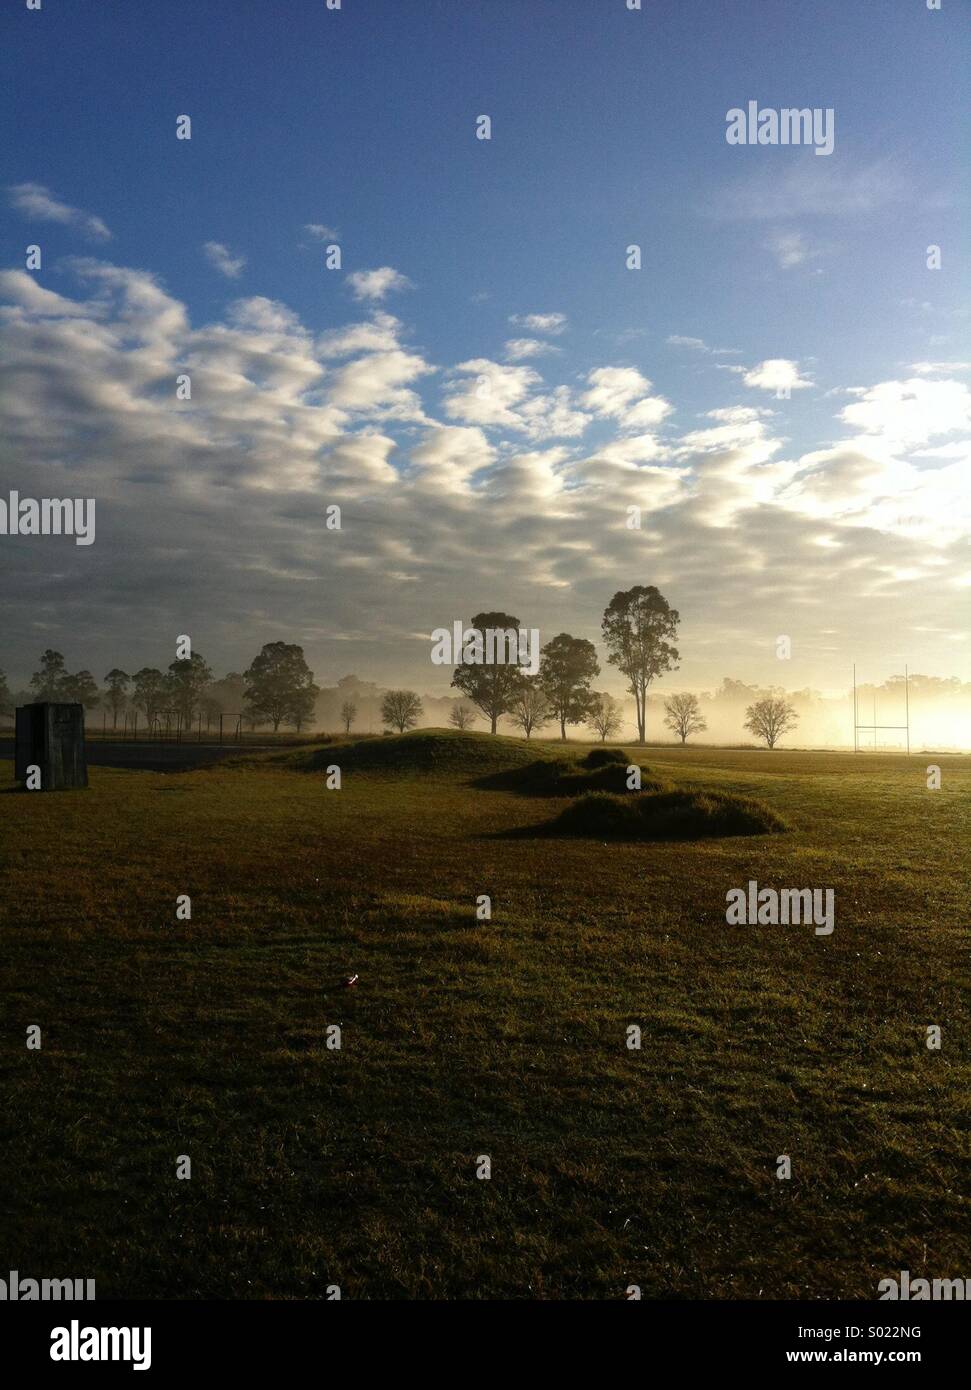 Early morning rural scene with cloudy sky and rugby goalposts Stock Photo